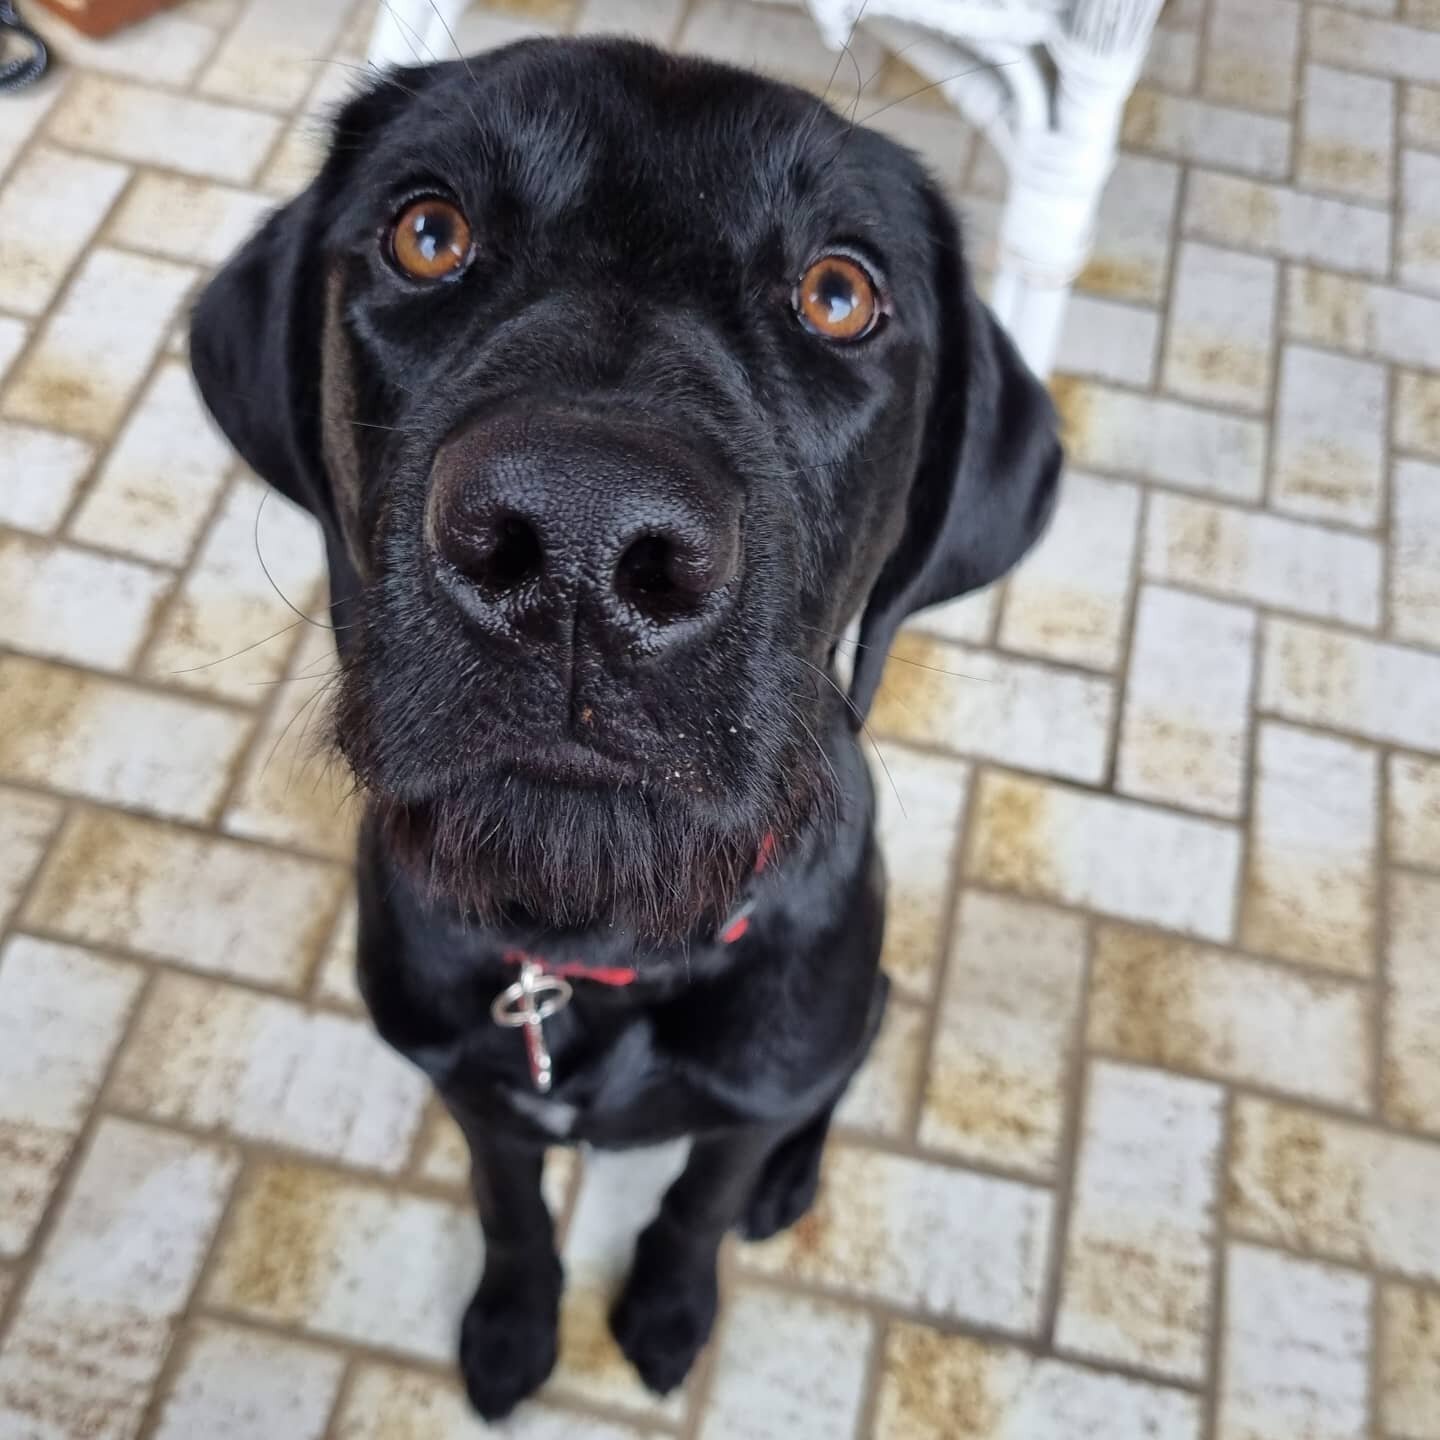 This is Argus who's been working with me on mat training, stays and impulse control games... don't you just love his beard!? 😍 #labradorcross #labmix #dogtrainer #dogtraining #positivereinforcement #positivedogtraining #dog #dogs #dogsofinstagram #d